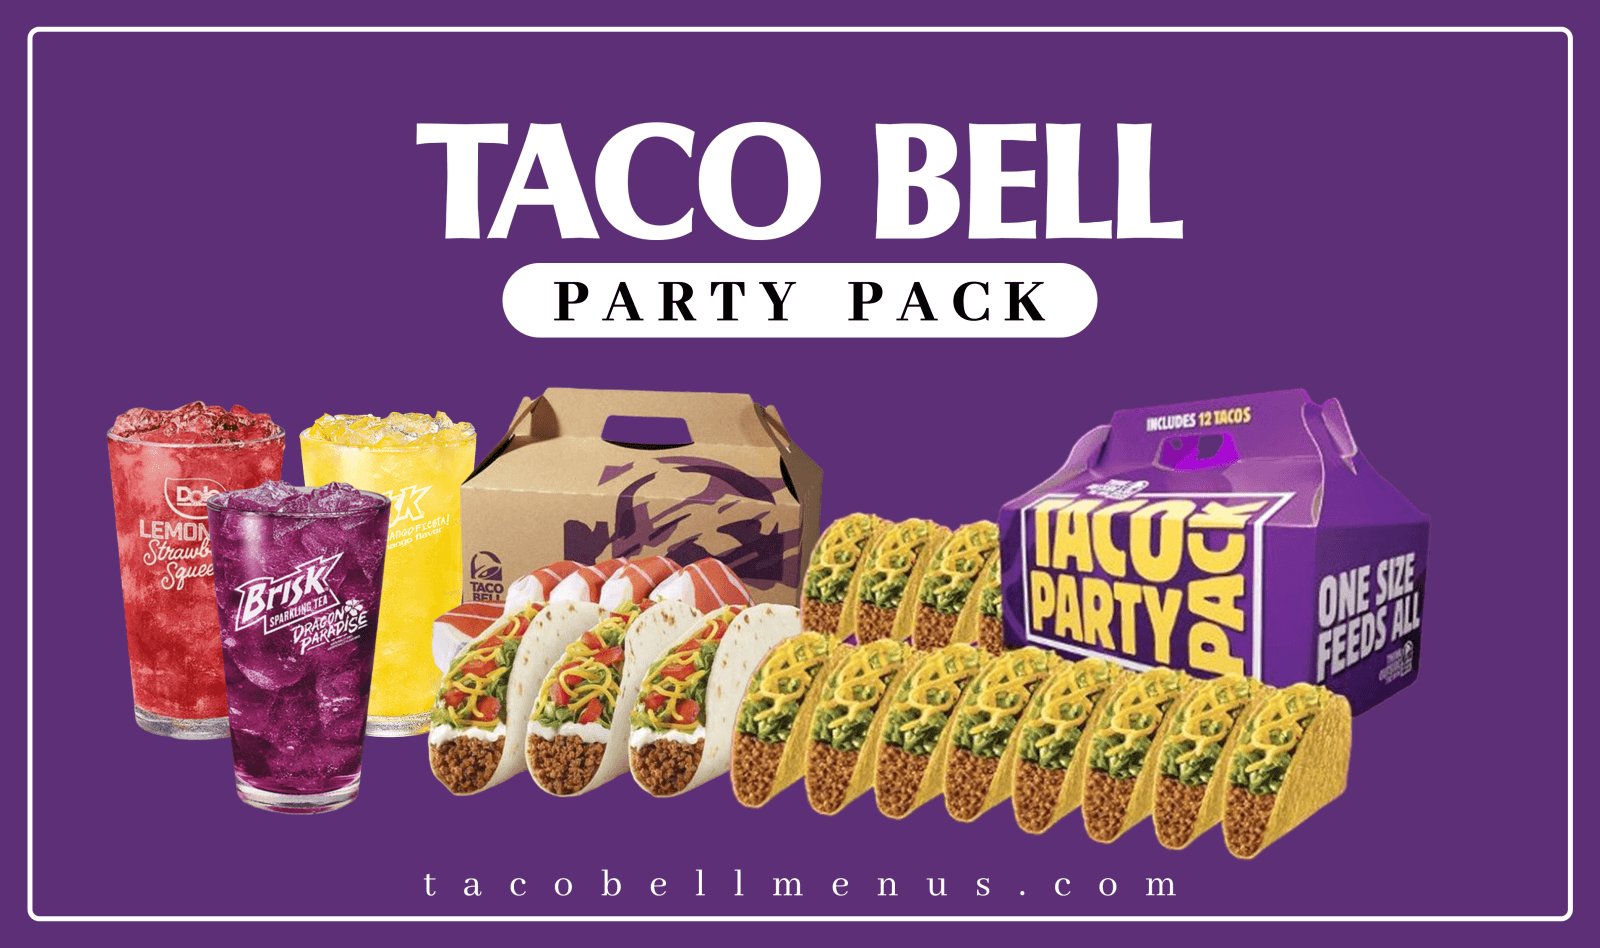 Taco Bell Party Pack, taco bell variety pack, taco bell party nachos, taco bell nacho party pack, Taco Party Pack, Supreme Taco Party Pack, Soft Taco Party Pack, Supreme Soft Taco Party Pack, Variety Taco Party Pack, Supreme Variety Taco Party Pack, Drinks Party Pack, Taco Bell Party Pack price, Taco Bell Party Pack calories